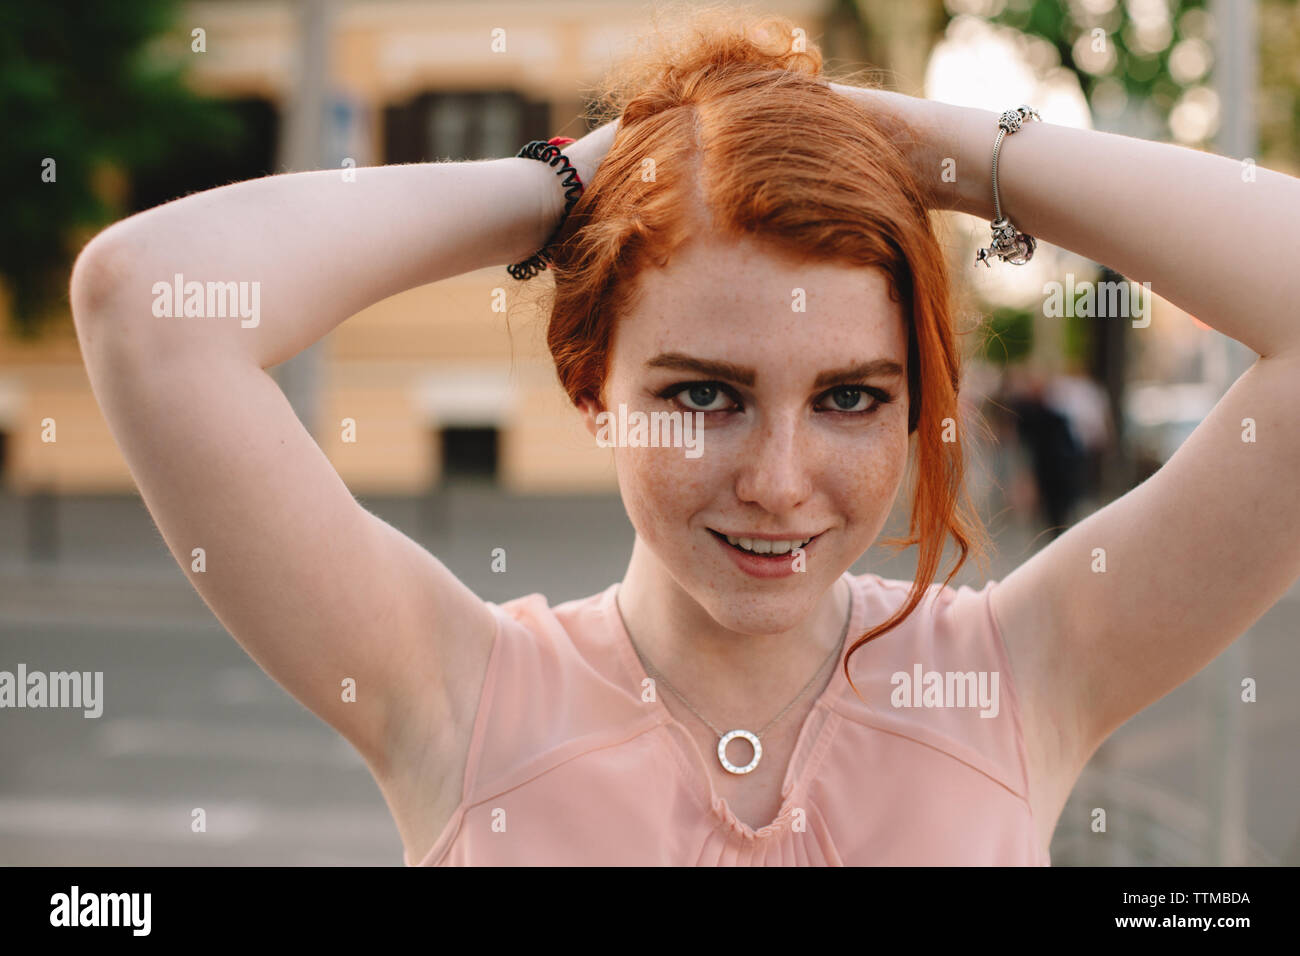 Portrait of young redheaded woman holding hair while standing in city Stock Photo